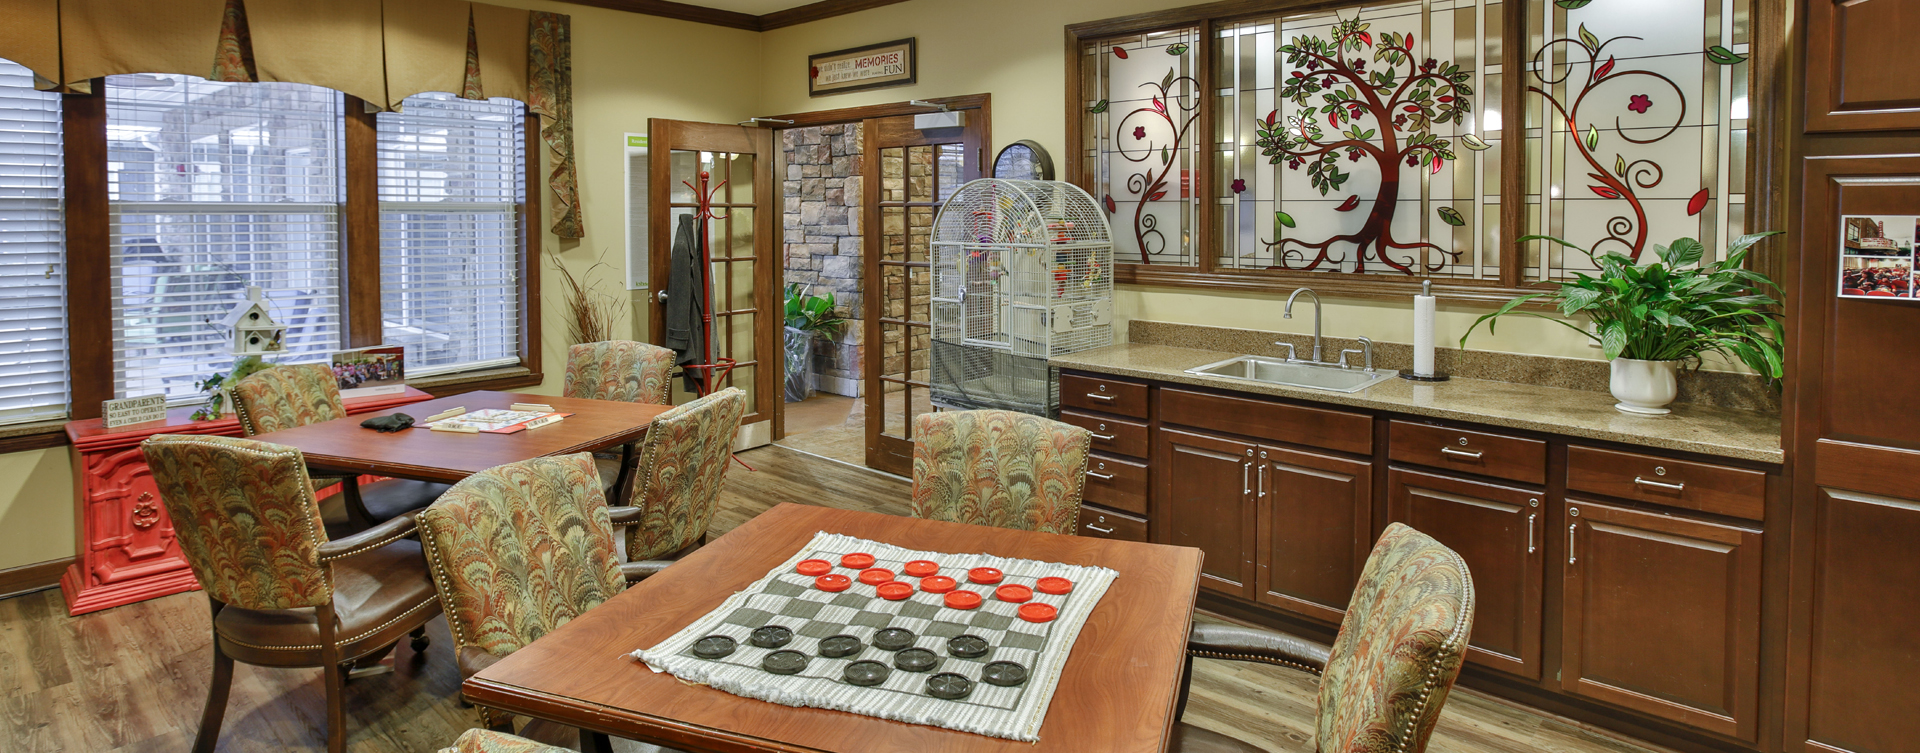 Enjoy a good card game with friends in the activity room at Bickford of Crown Point